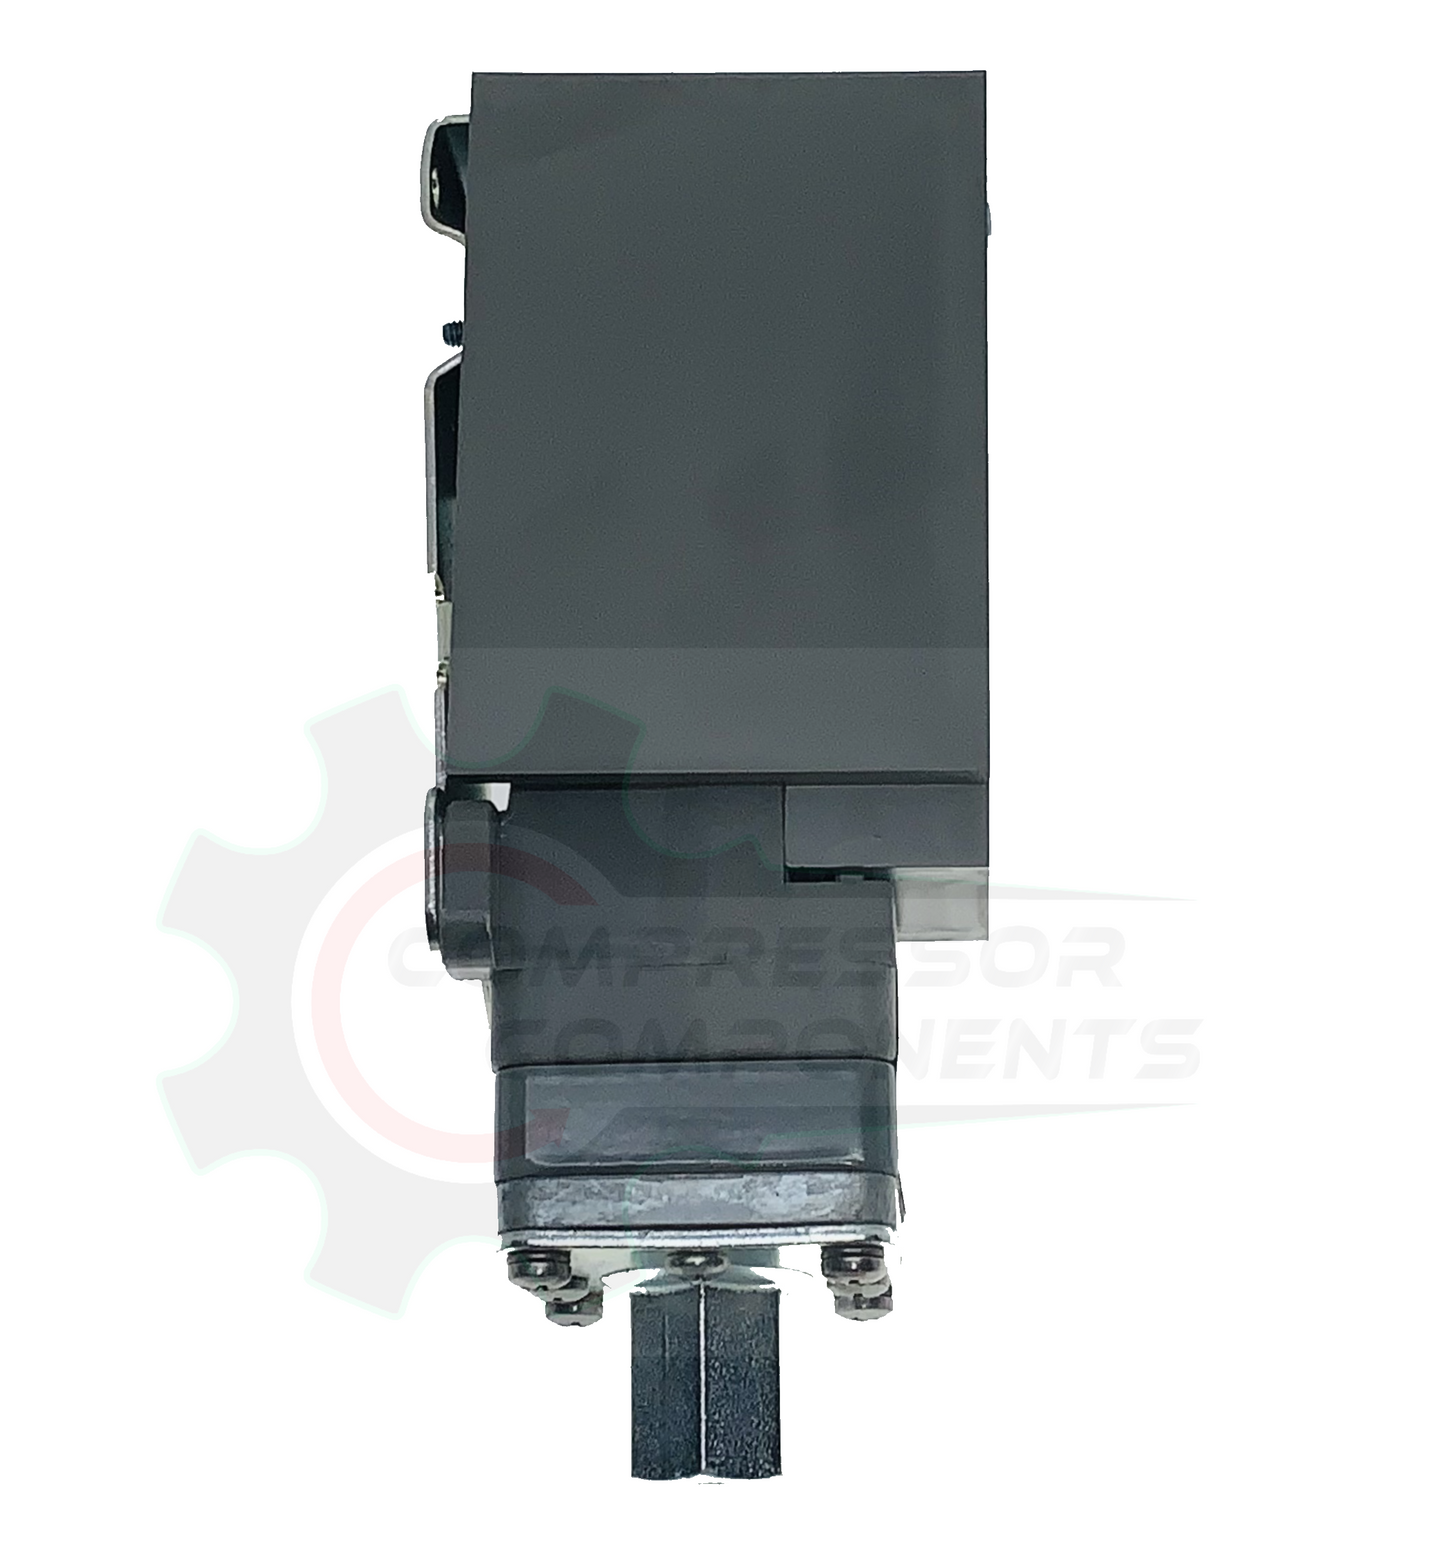 SQUARE D 9012GNG5 / SINGLE PORT PRESSURE SWITCH 3-150 PSI  FULLY ADJUSTABLE